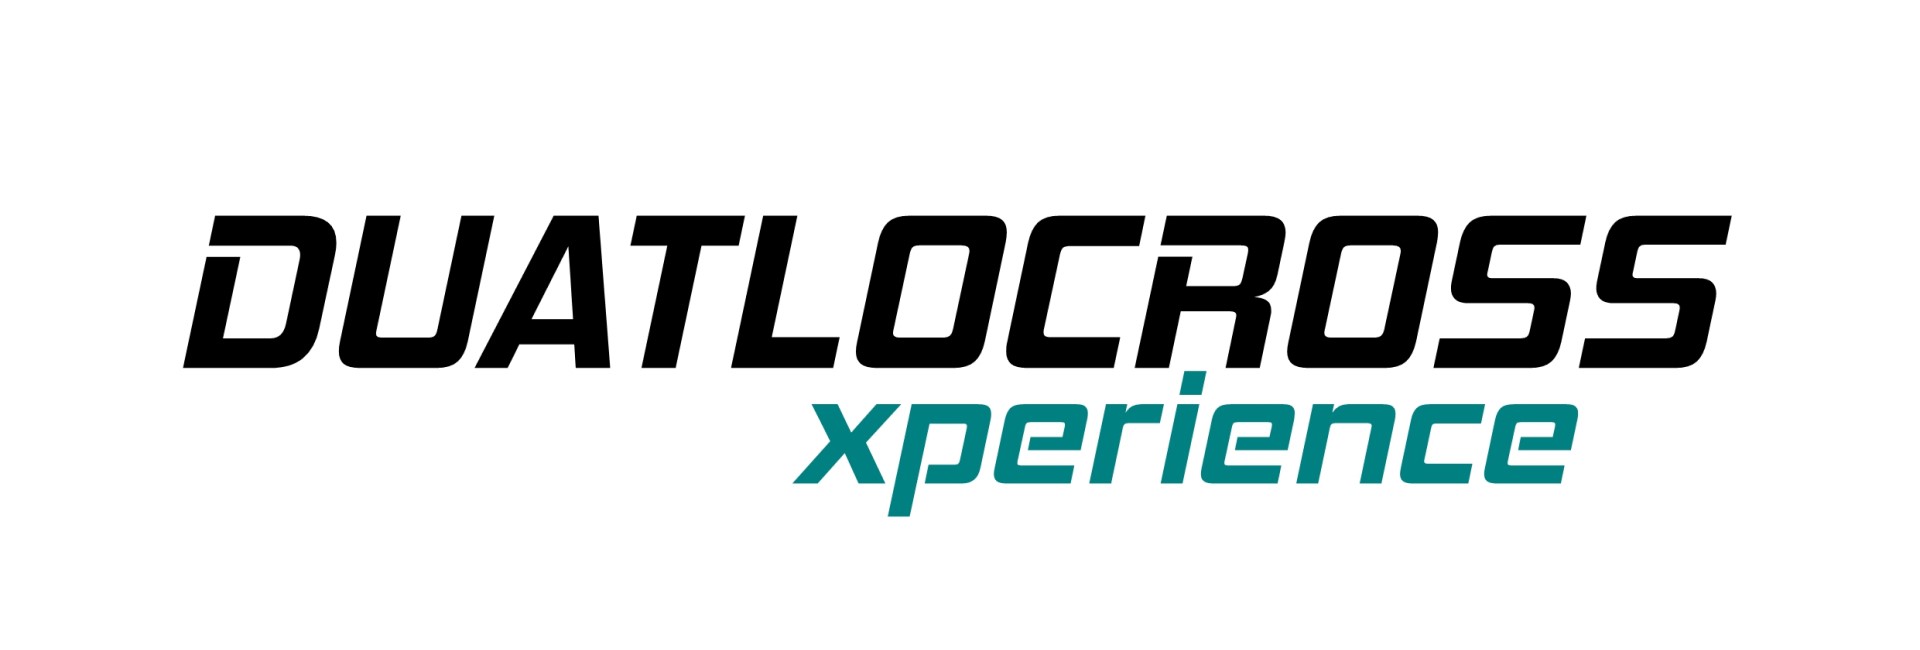 Duatlocross Xperience